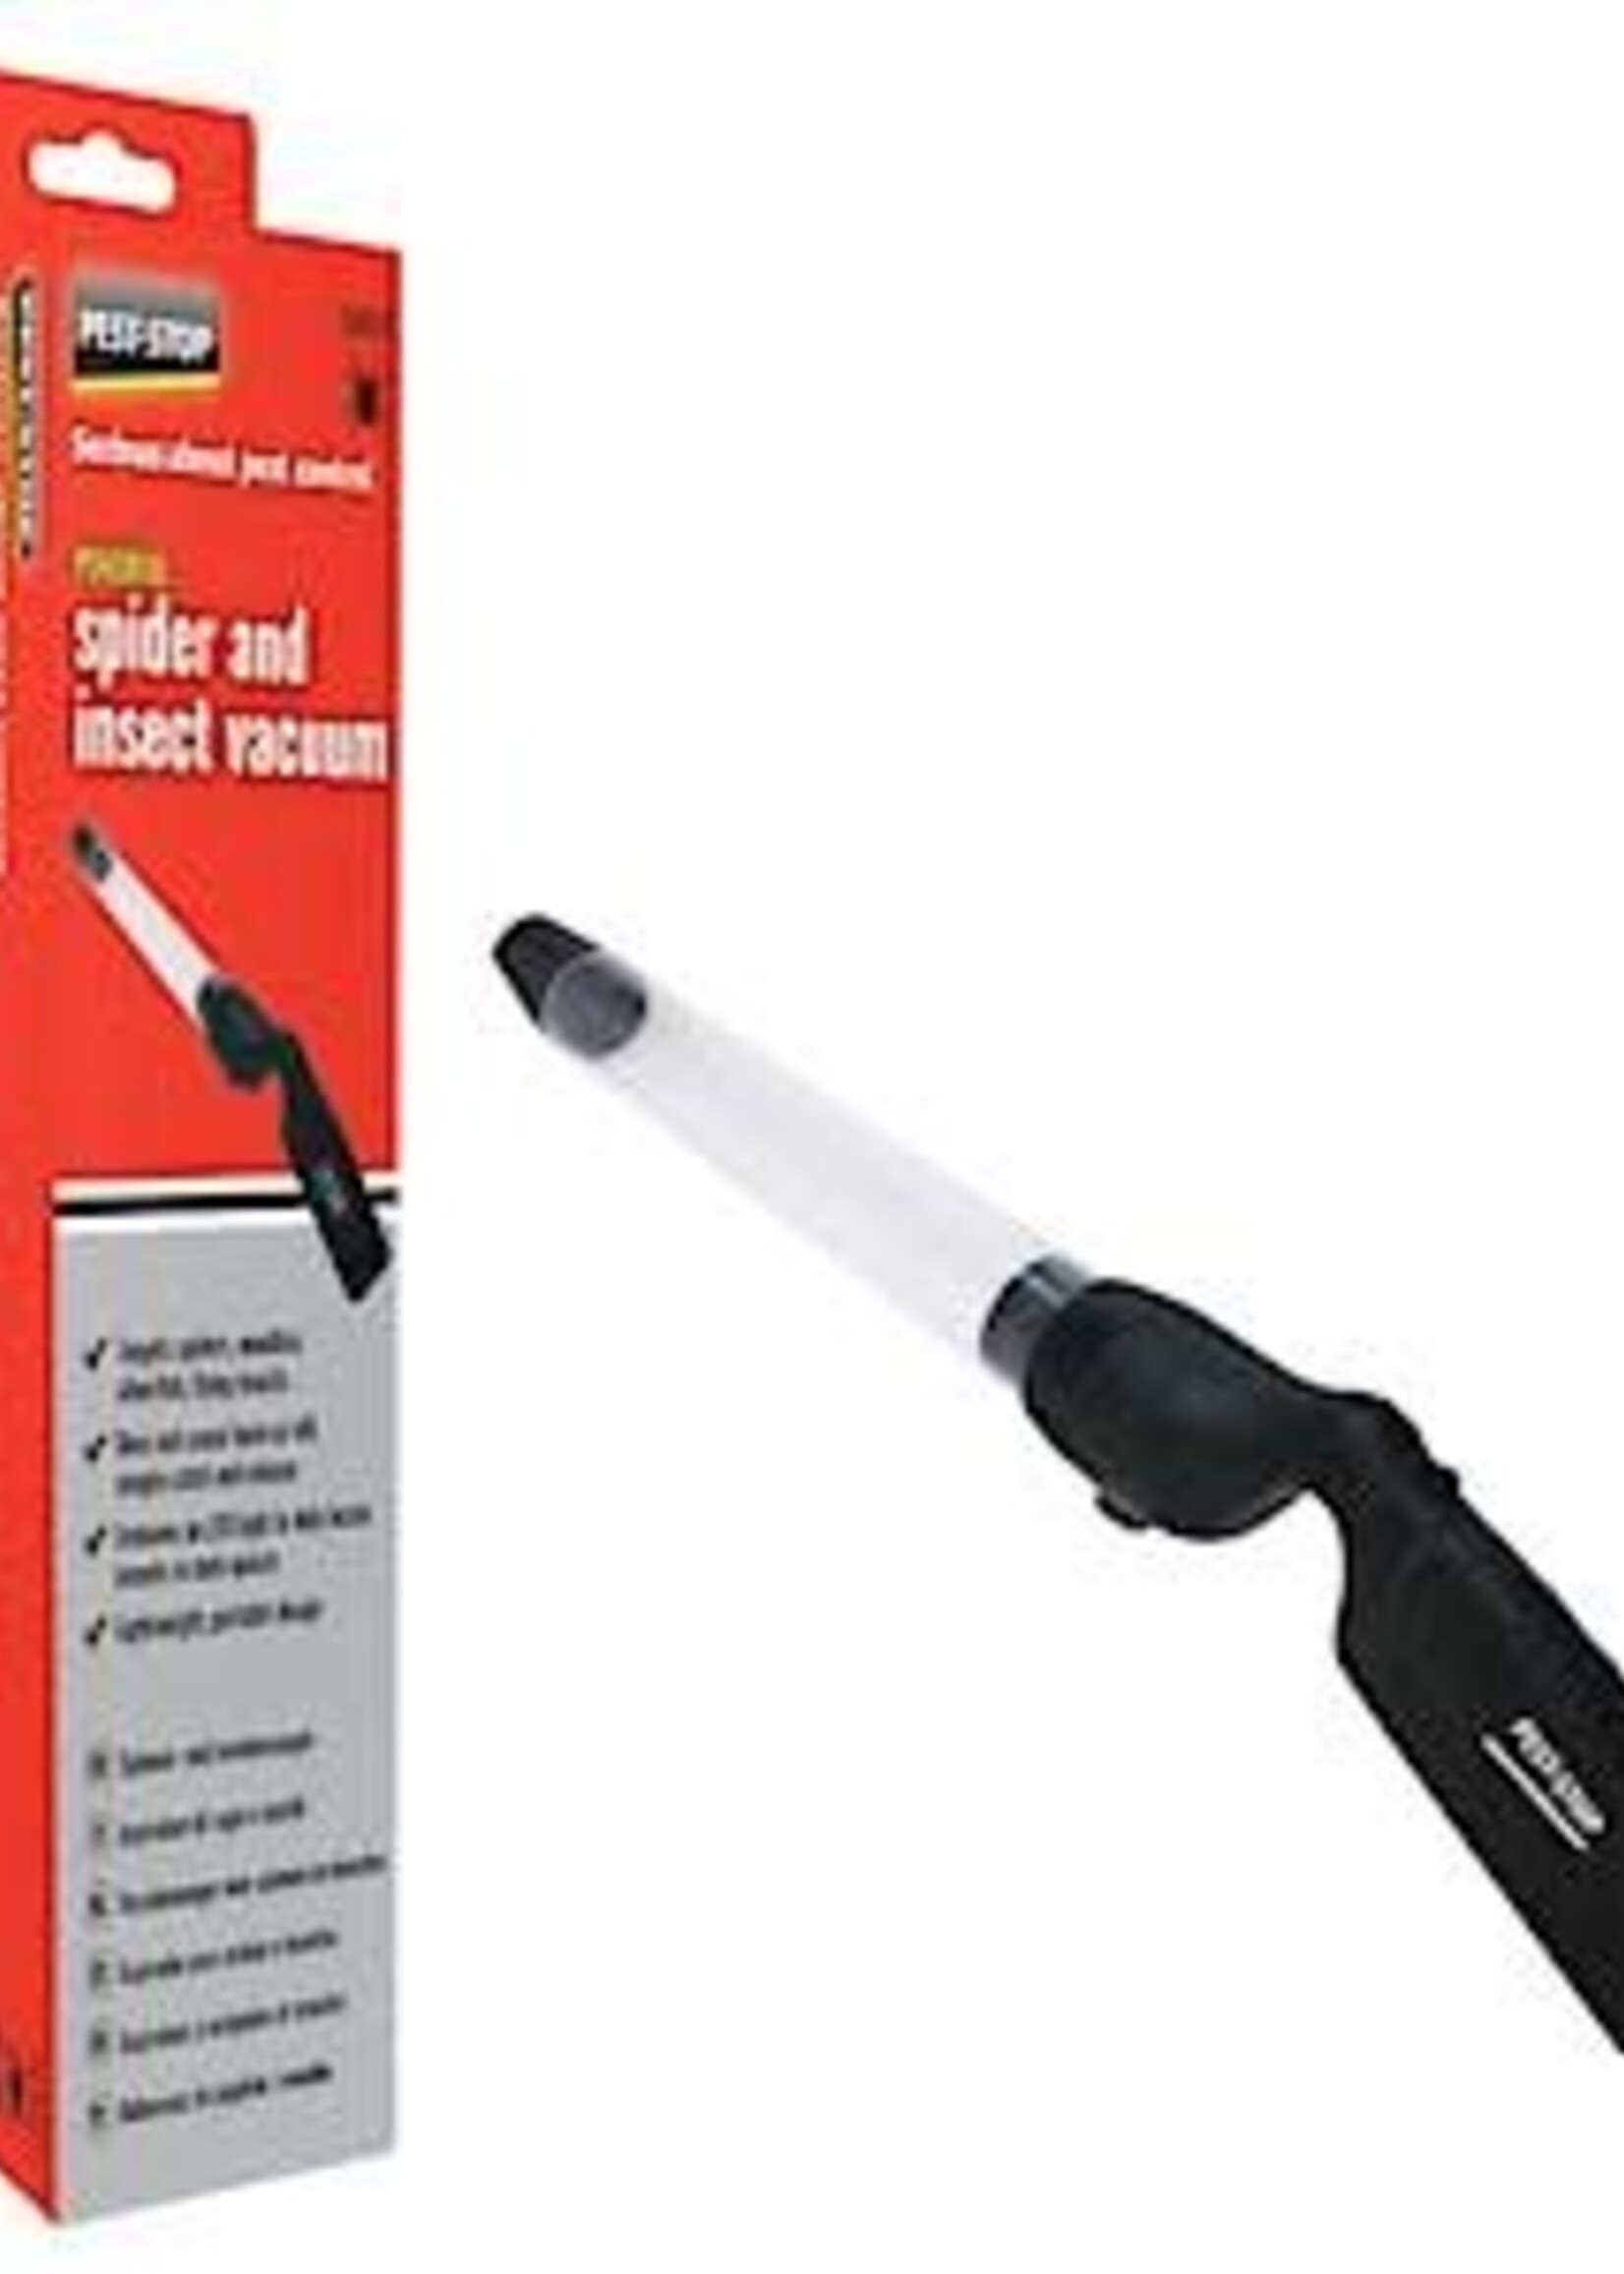 Pest-Stop Spider and Insect Vacuum